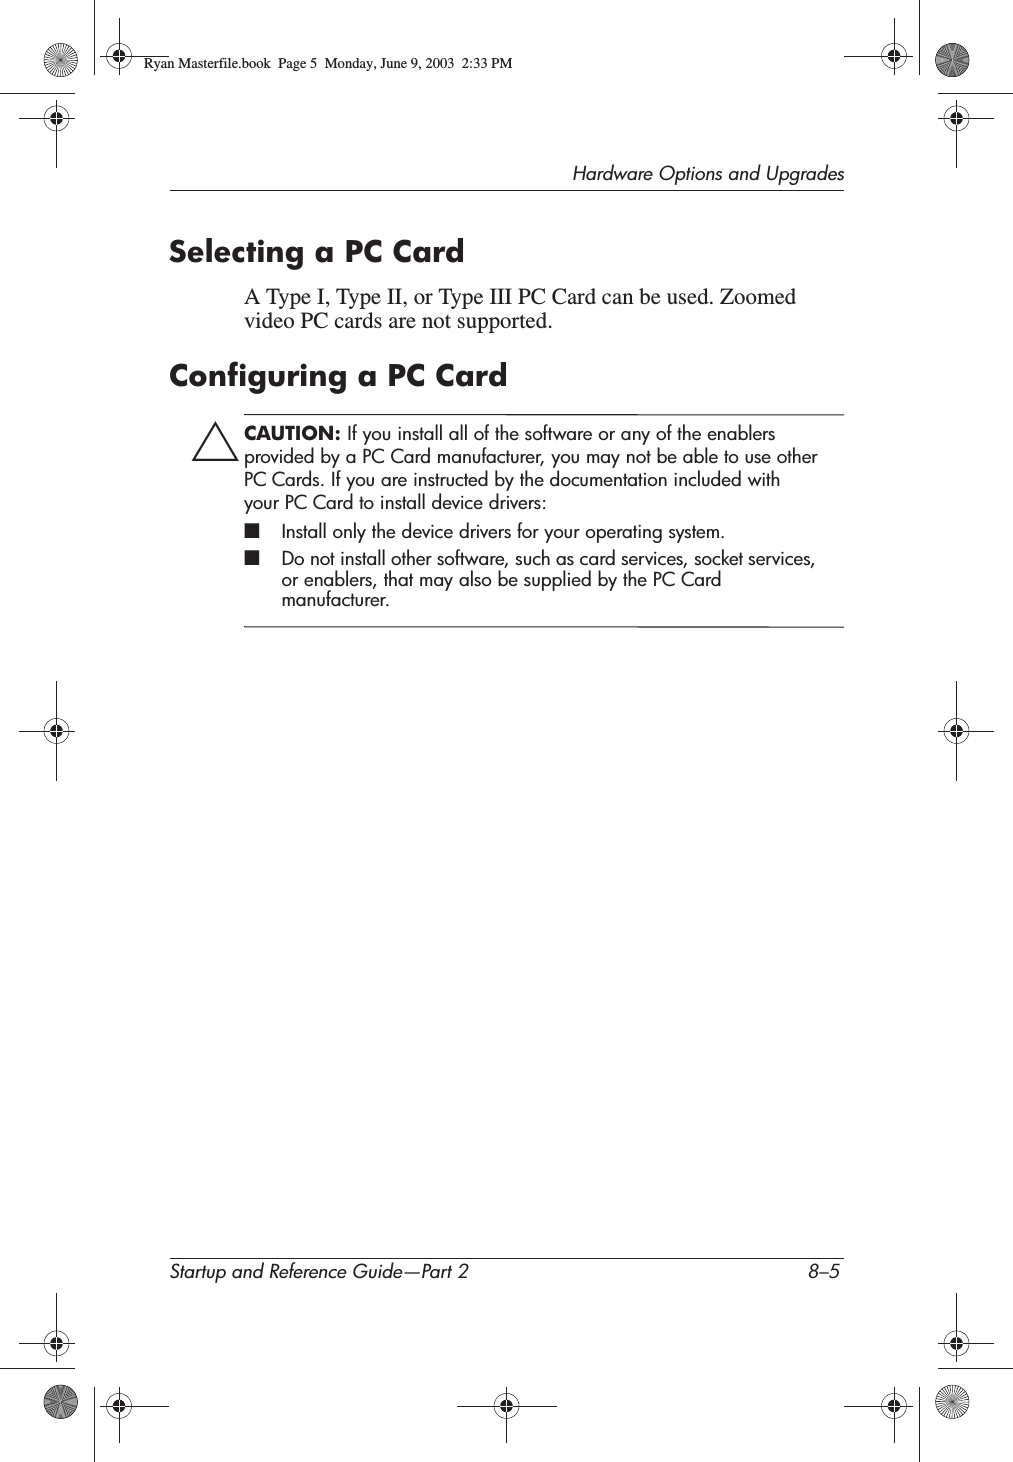 Hardware Options and UpgradesStartup and Reference Guide—Part 2 8–5Selecting a PC CardA Type I, Type II, or Type III PC Card can be used. Zoomed video PC cards are not supported.Configuring a PC CardÄCAUTION: If you install all of the software or any of the enablers provided by a PC Card manufacturer, you may not be able to use other PC Cards. If you are instructed by the documentation included with your PC Card to install device drivers:■Install only the device drivers for your operating system.■Do not install other software, such as card services, socket services, or enablers, that may also be supplied by the PC Card manufacturer.Ryan Masterfile.book  Page 5  Monday, June 9, 2003  2:33 PM